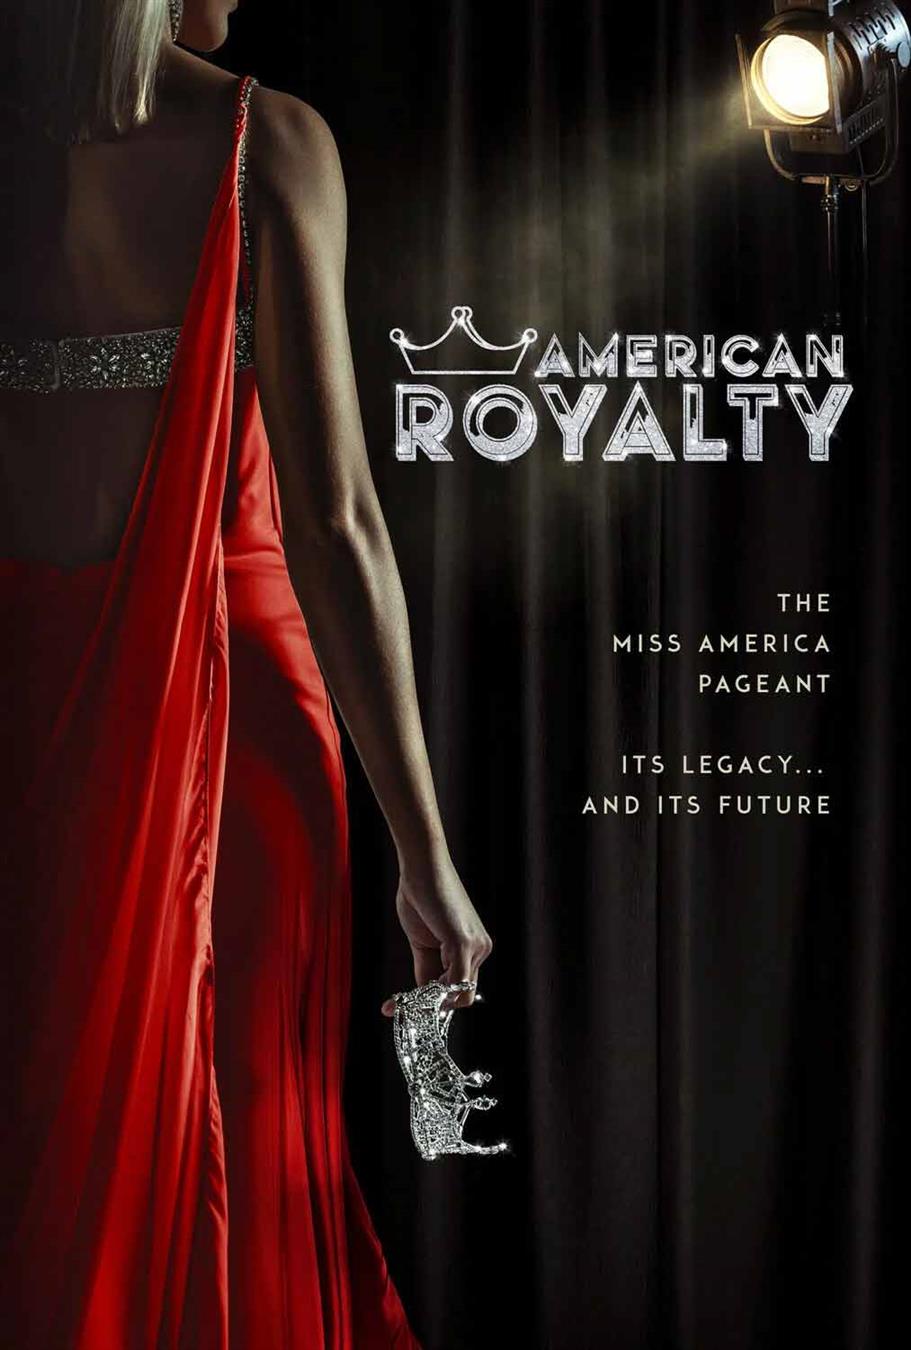 ‘American Royalty’ documentary based on Miss America sets release date